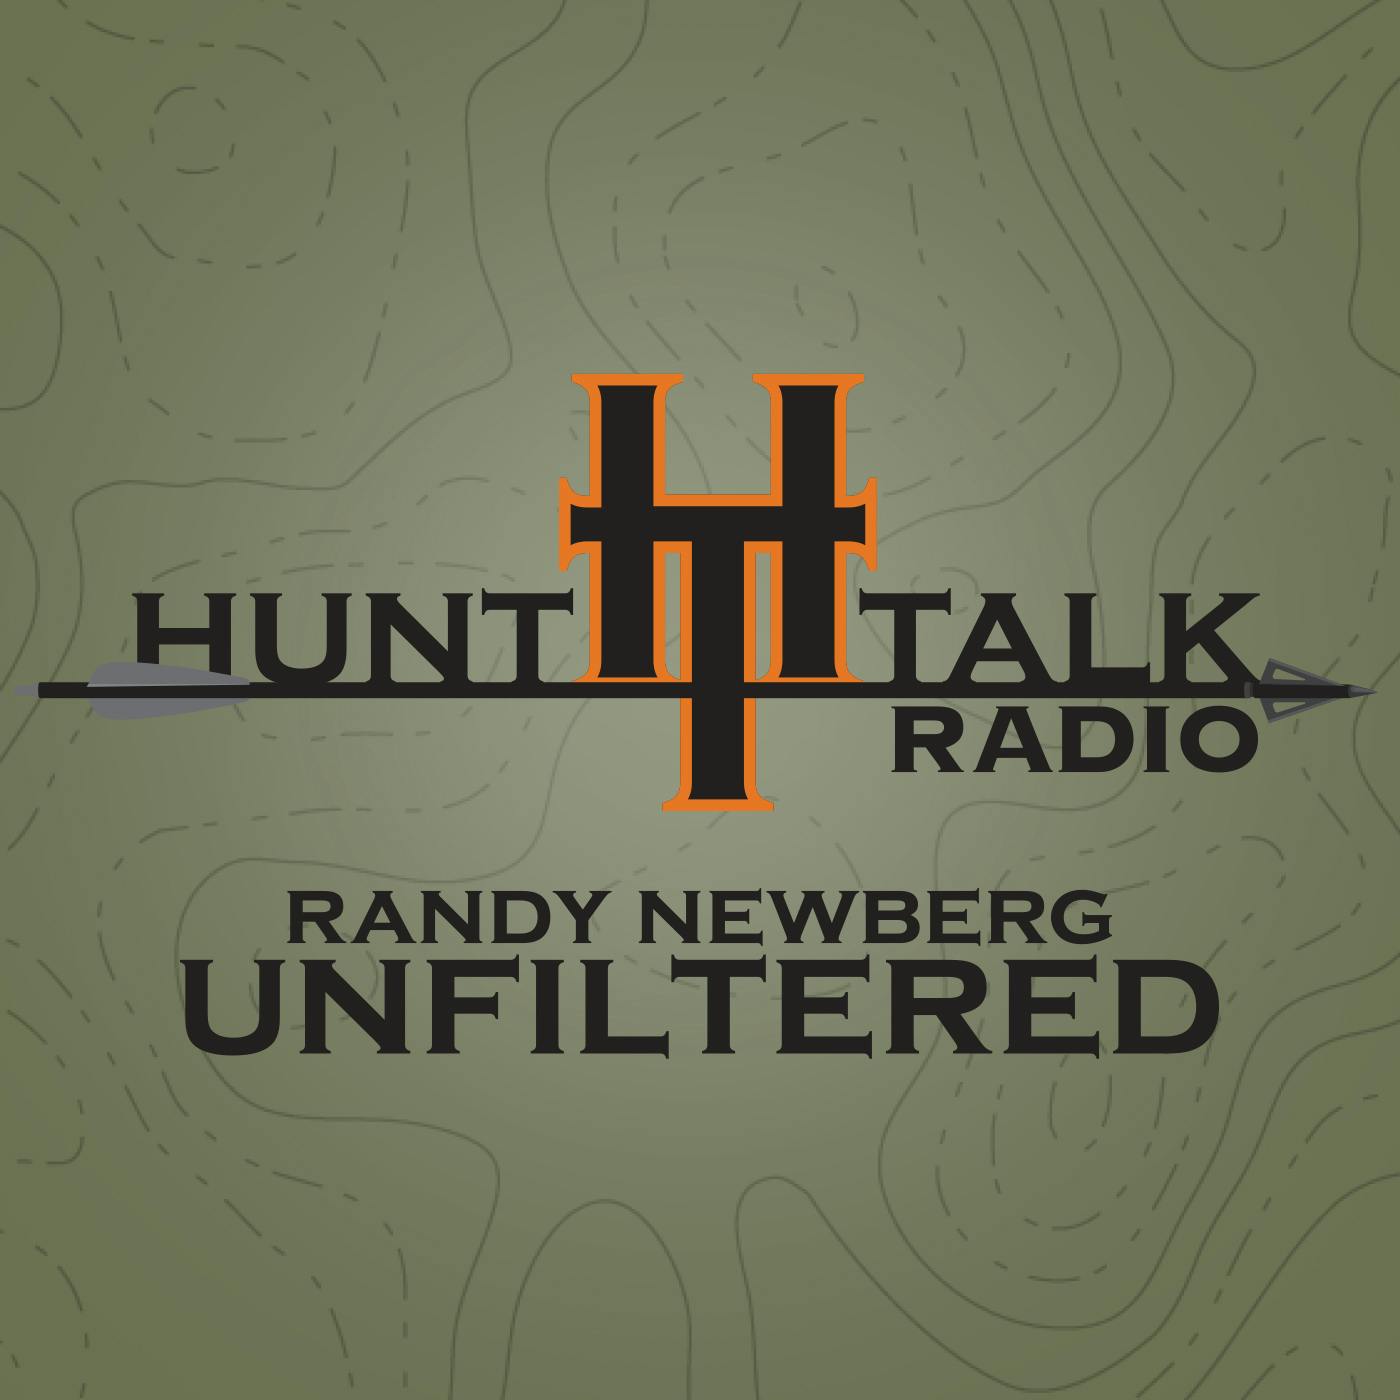 EP O22 - Randy visits with Janis Putelis and Nicole Qualtieri of MeatEater